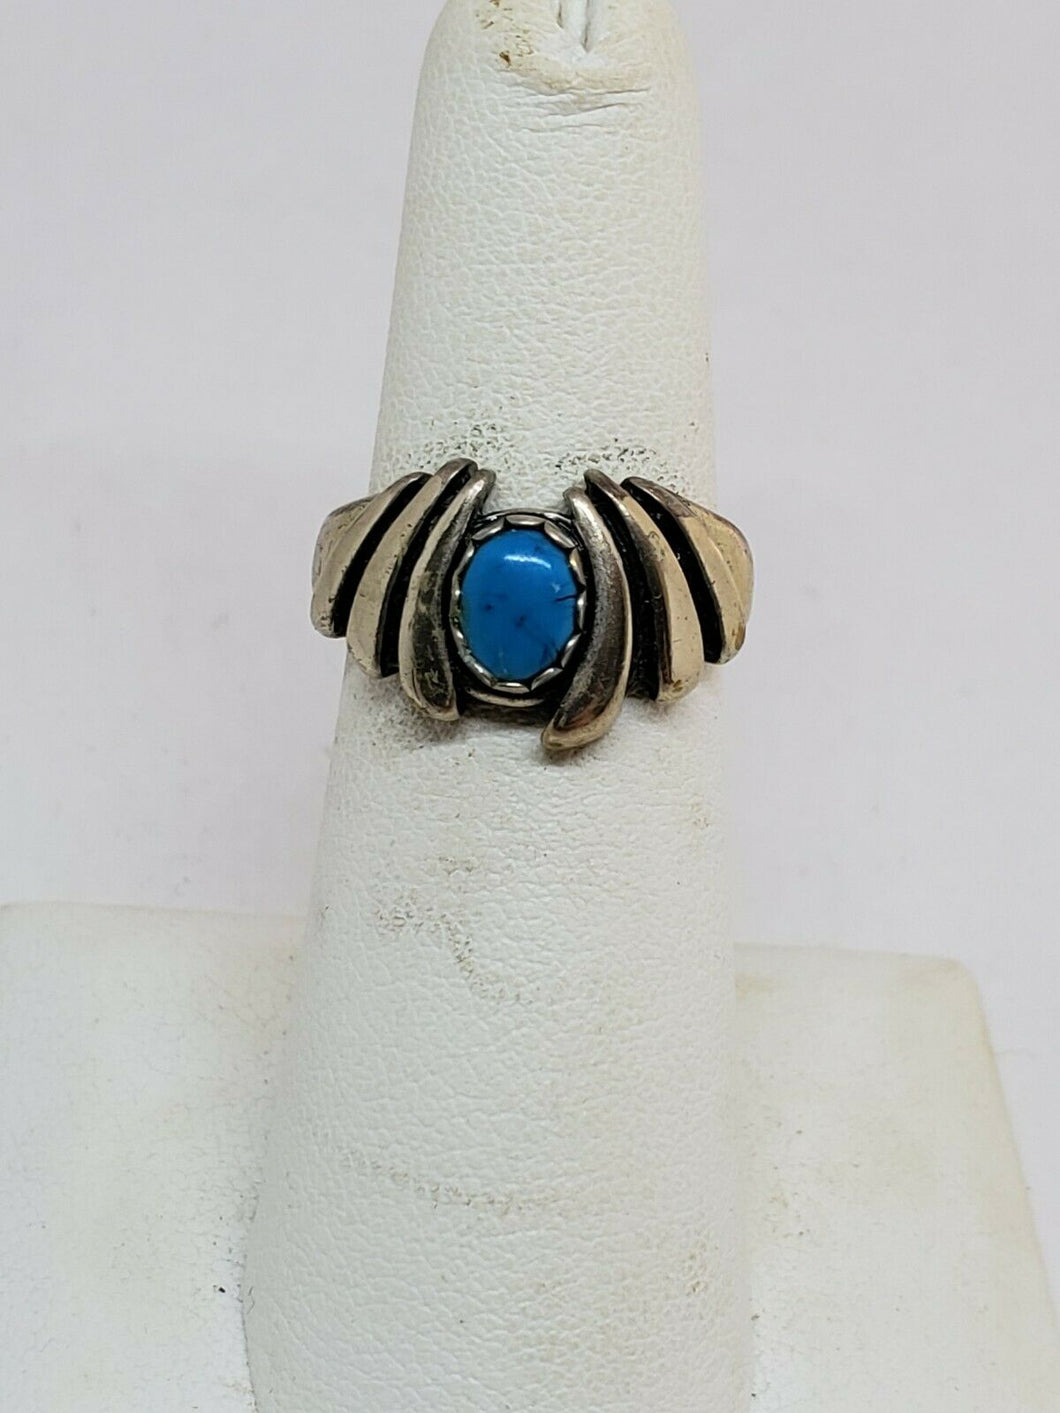 Vintage Wheeler Manufacturing Turquoise Sterling Silver Ring Size 5